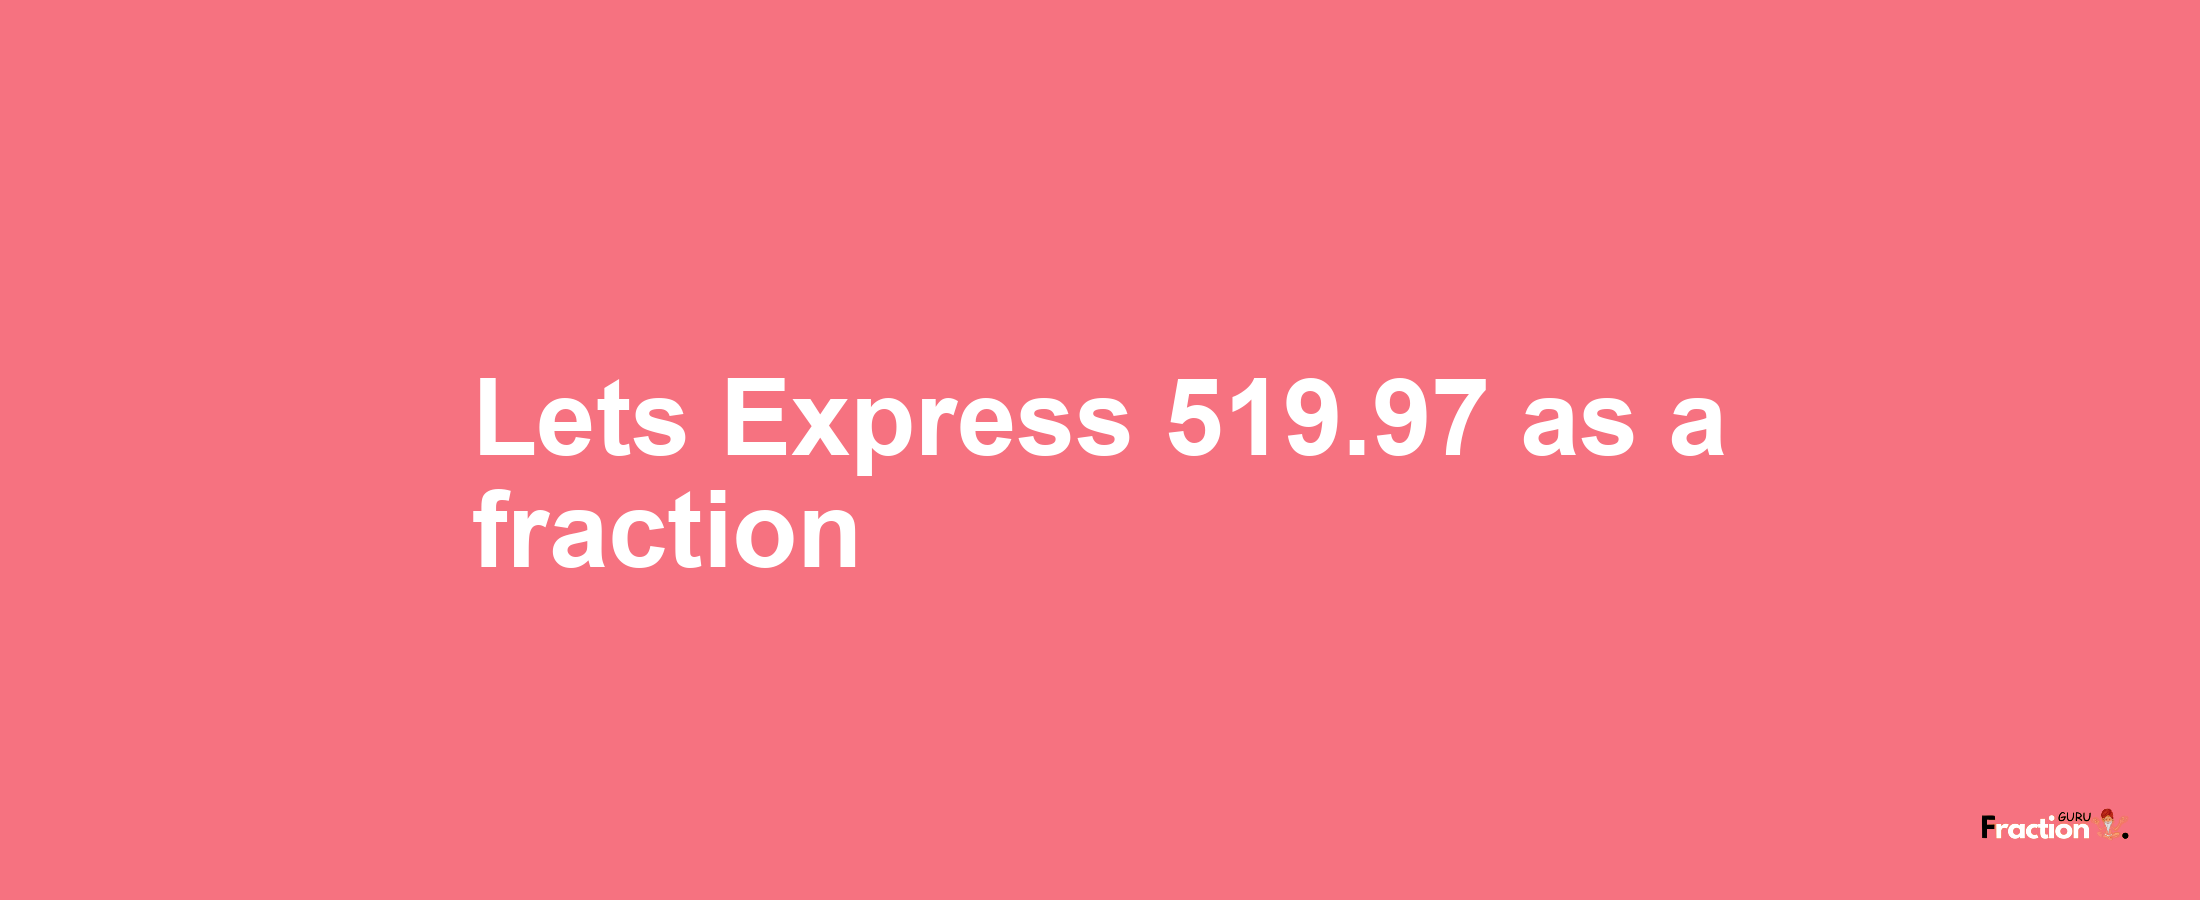 Lets Express 519.97 as afraction